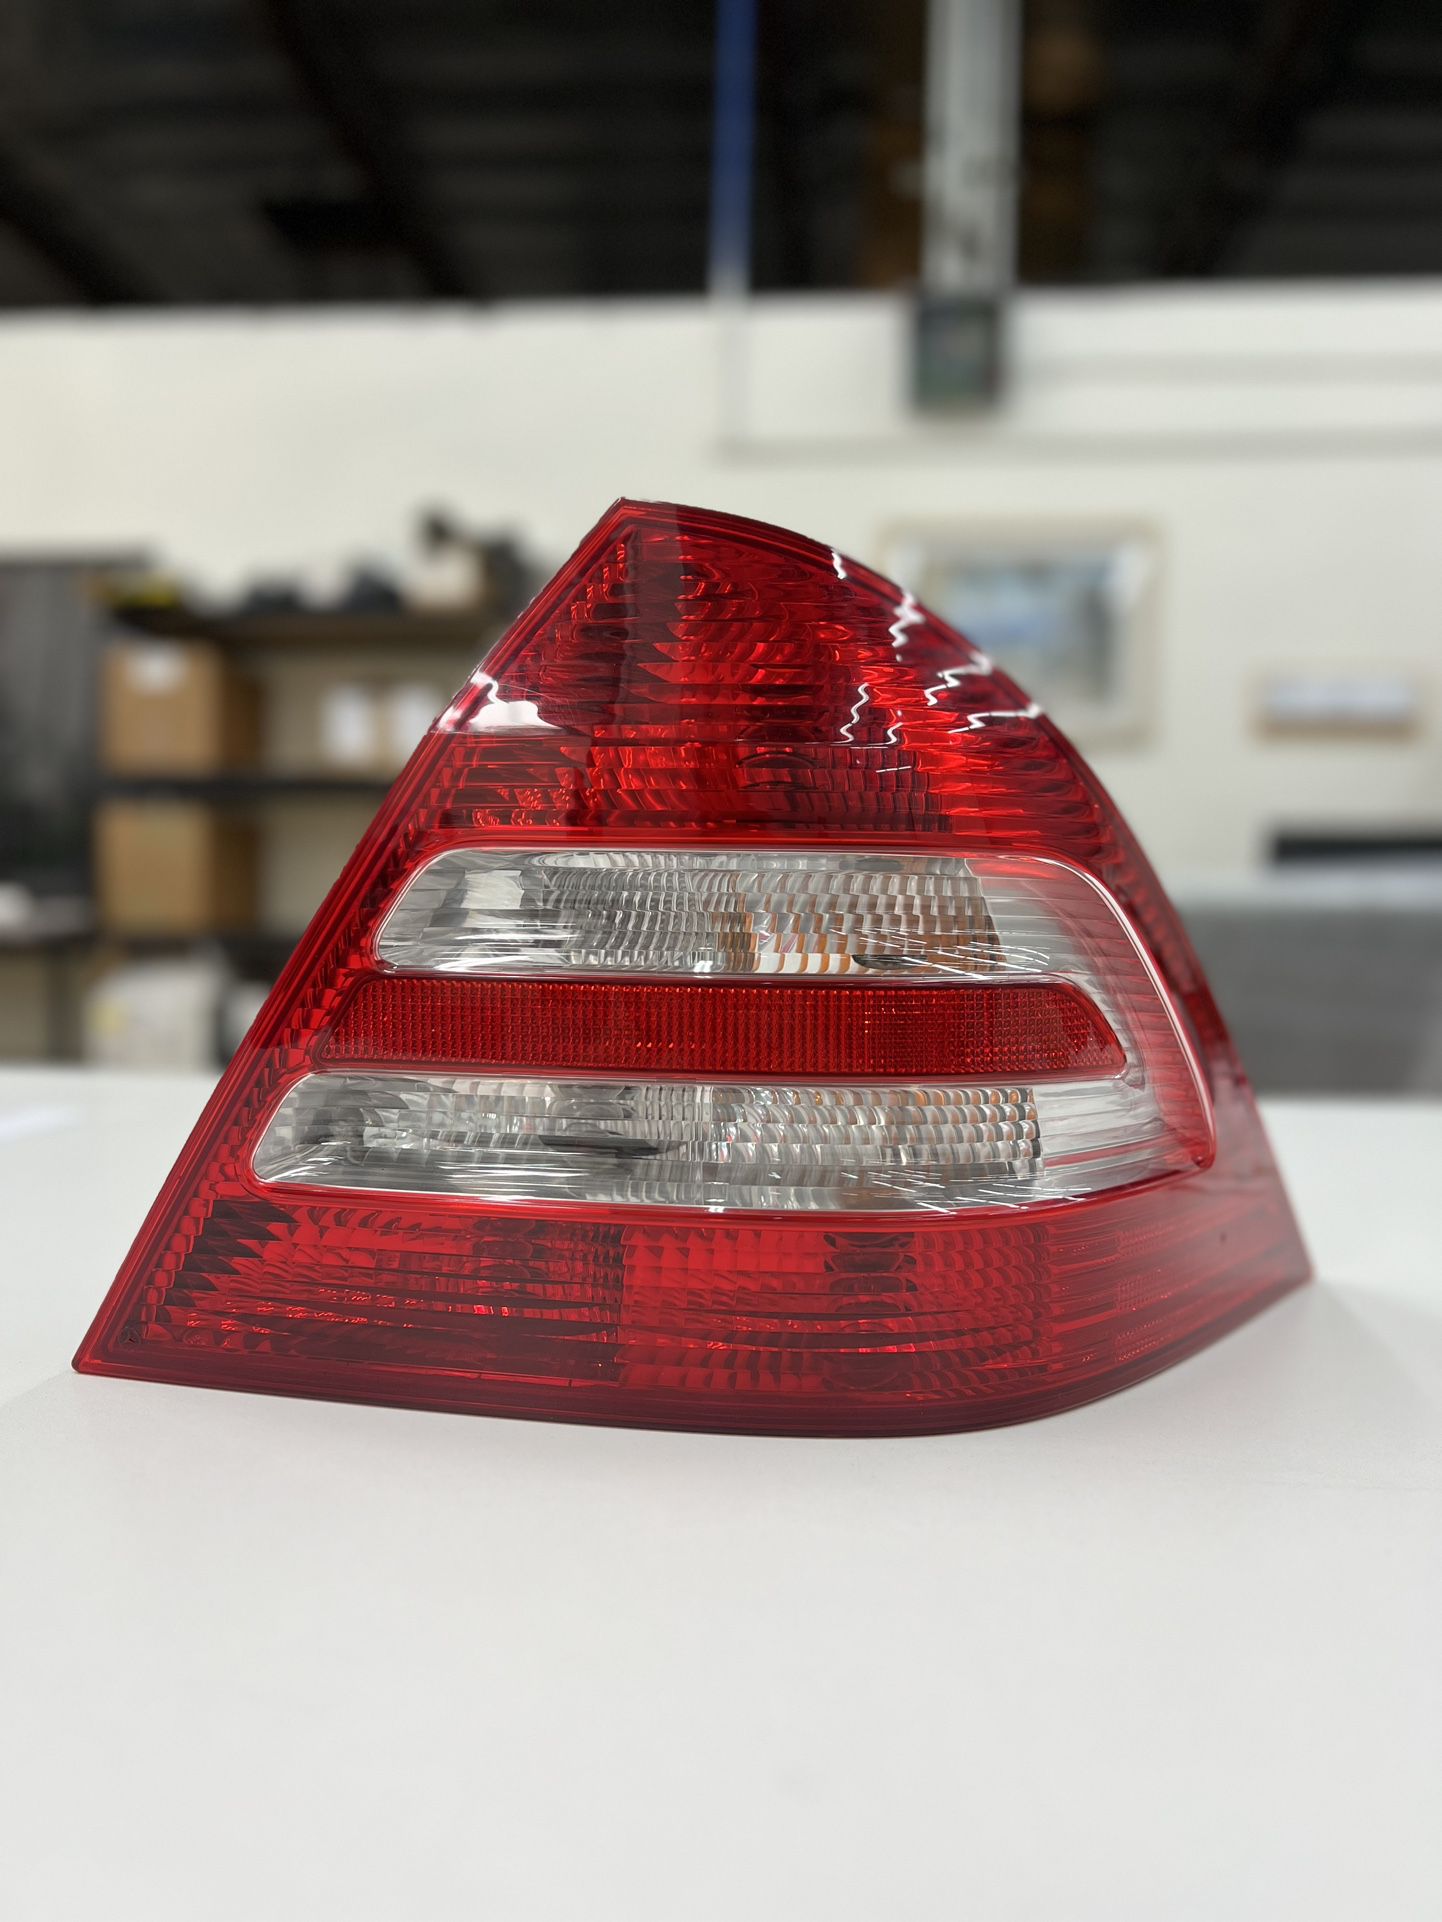 Mercedes Benz C230 W203 Passenger Rear Tail Light OEM A(contact info removed)